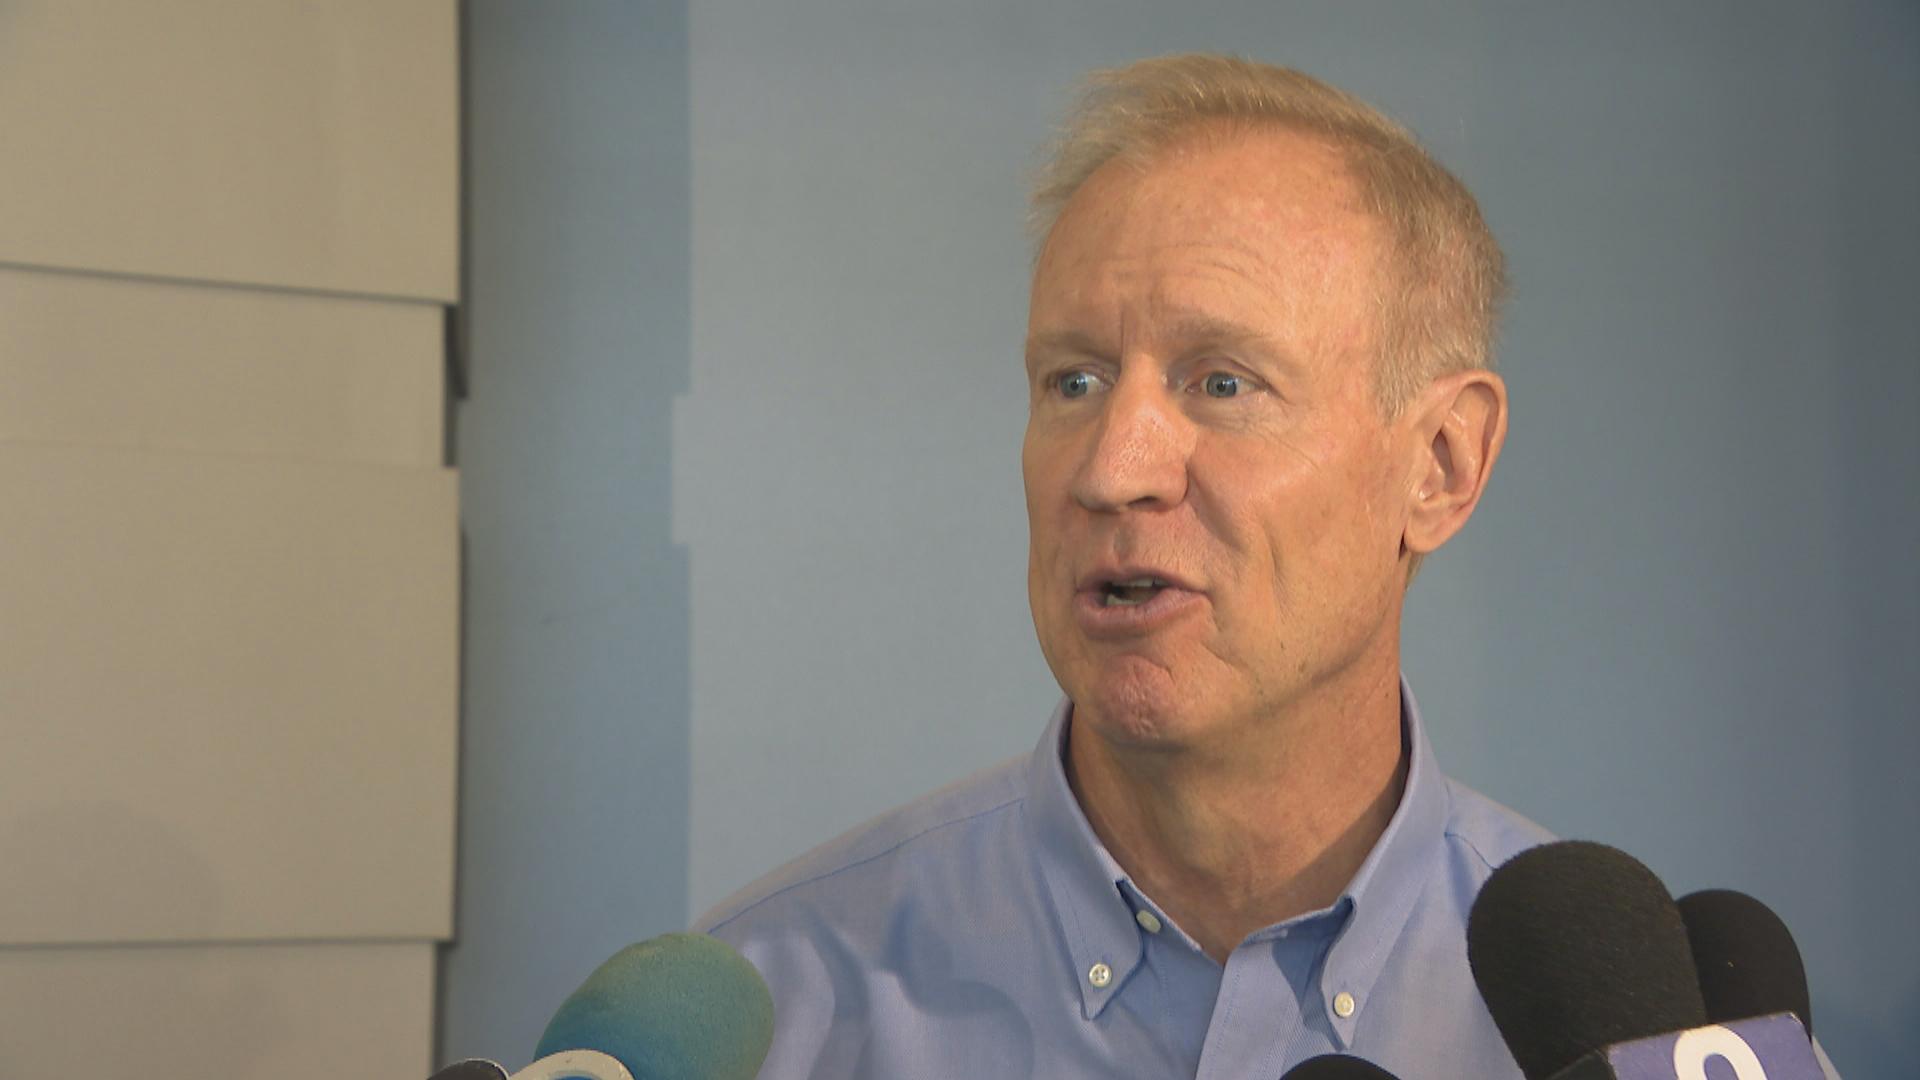 Gov. Bruce Rauner: “I hope he’s been doing something illegal and I hope he gets prosecuted.”